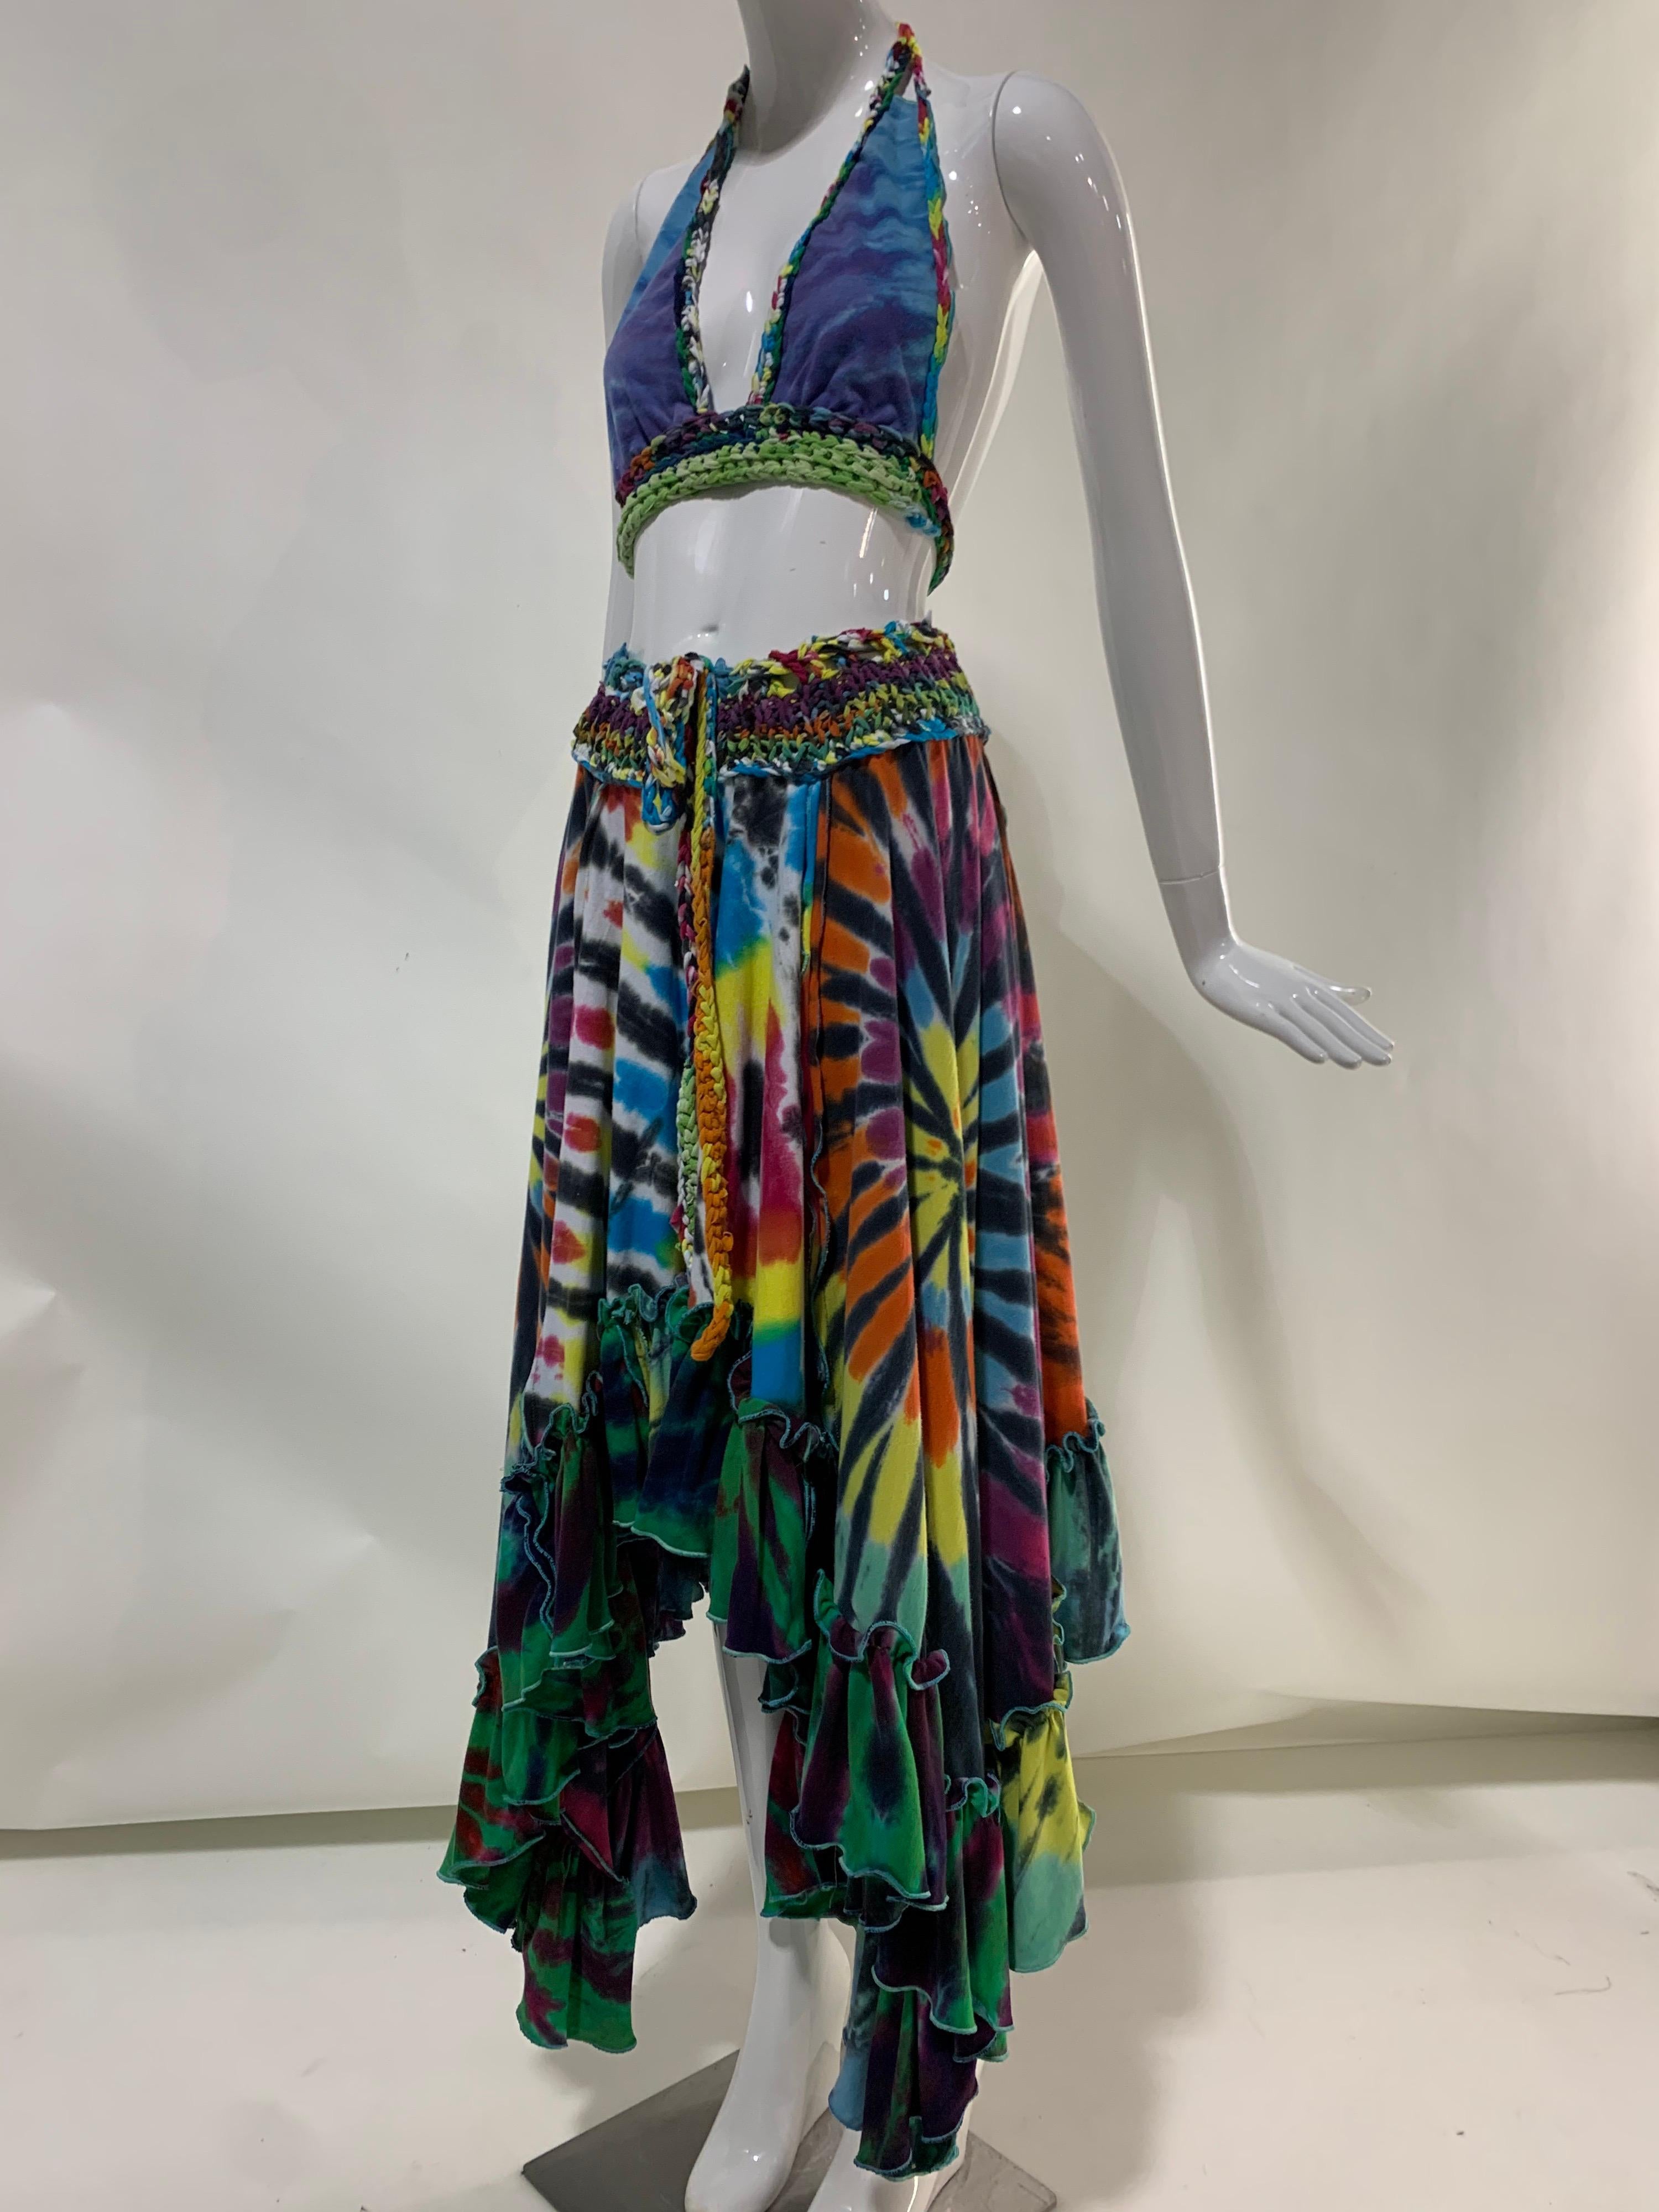 Torso Creations rainbow tie-dyed skirt and halter ensemble: Skirt has a hi-low hemline and ruffled tiers with a hand knit wide waistband and trim made from upcycled vintage t-shirts. Halter has matching fabric and knit details and ties at neck and